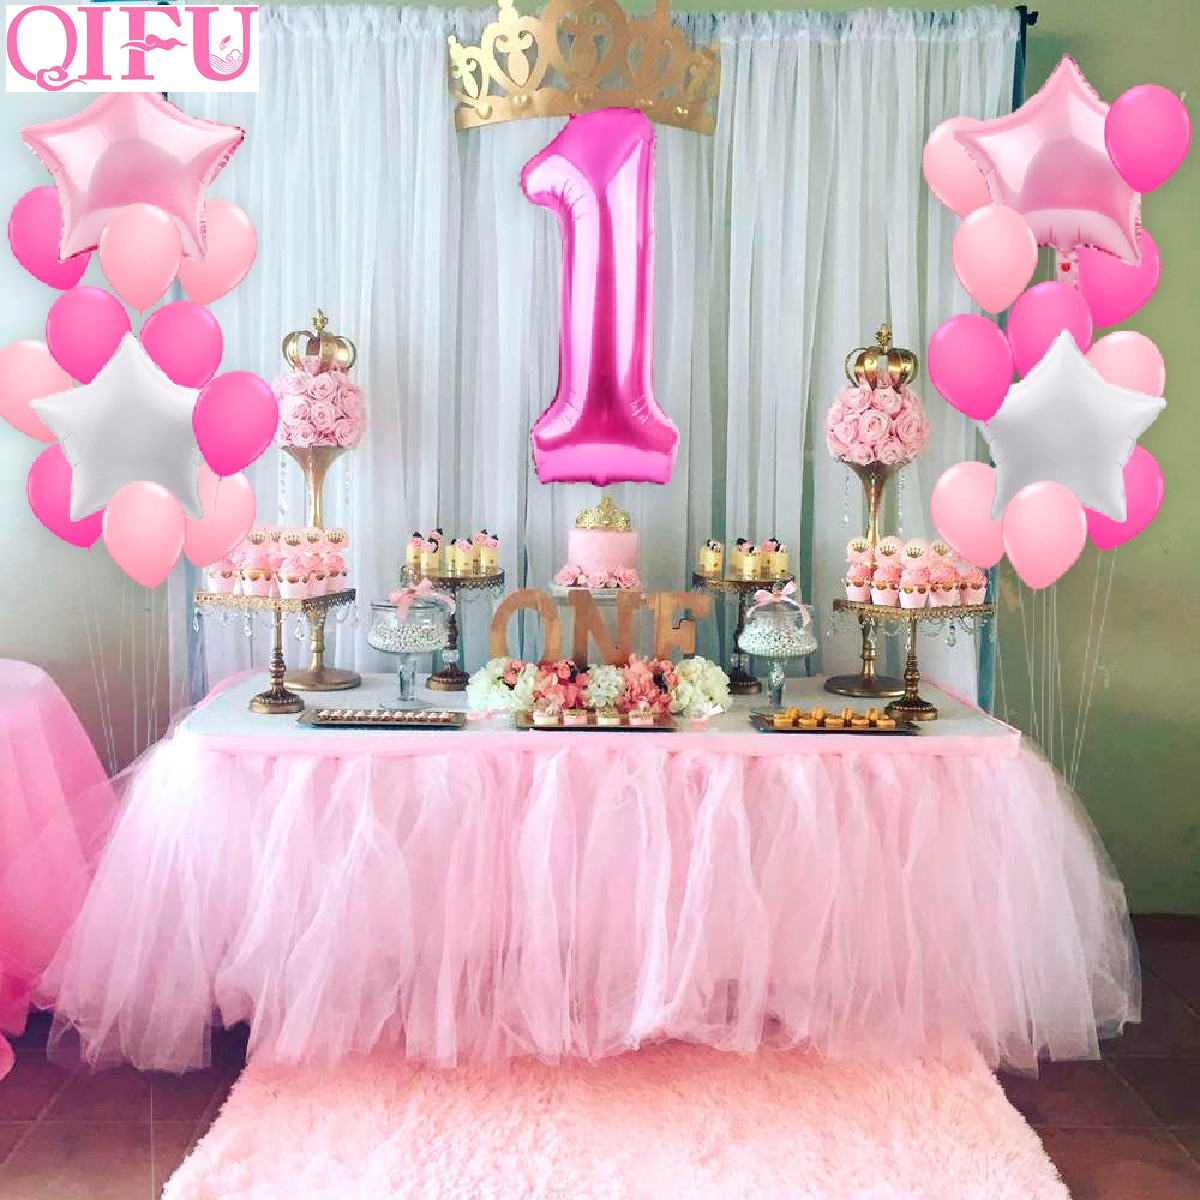 First Birthday Party Decorations
 QIFU 1st Birthday Balloon Boy Foil Number Ballon e Year